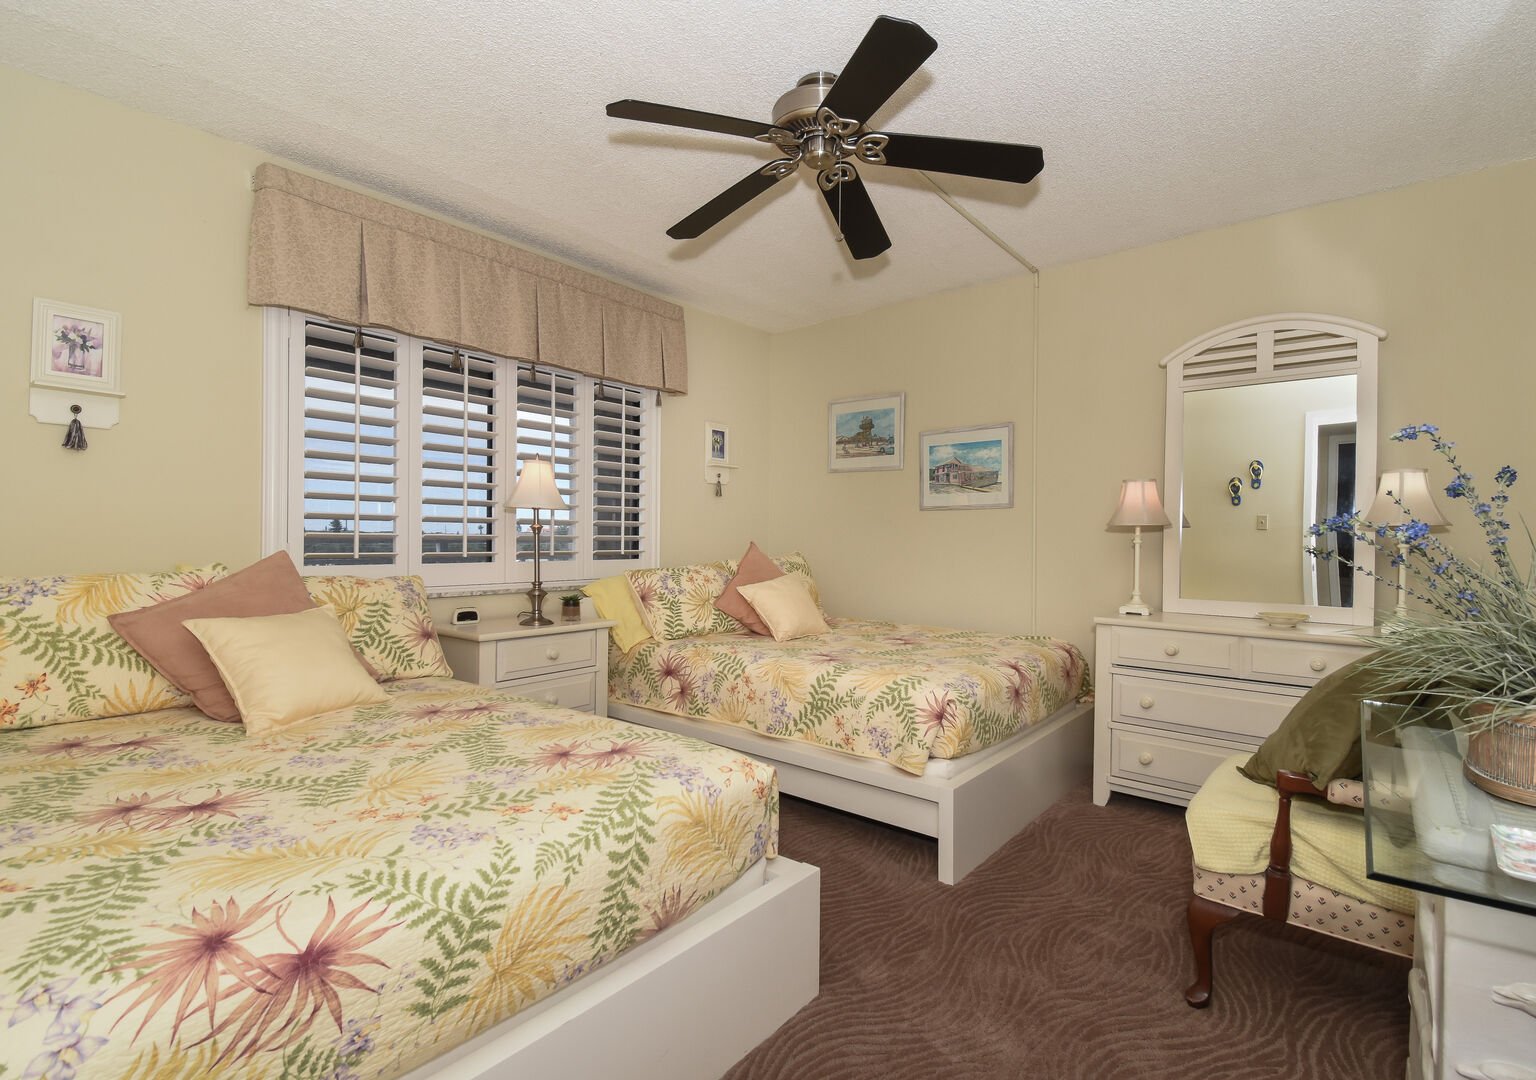 Guest bedroom with 2 beds